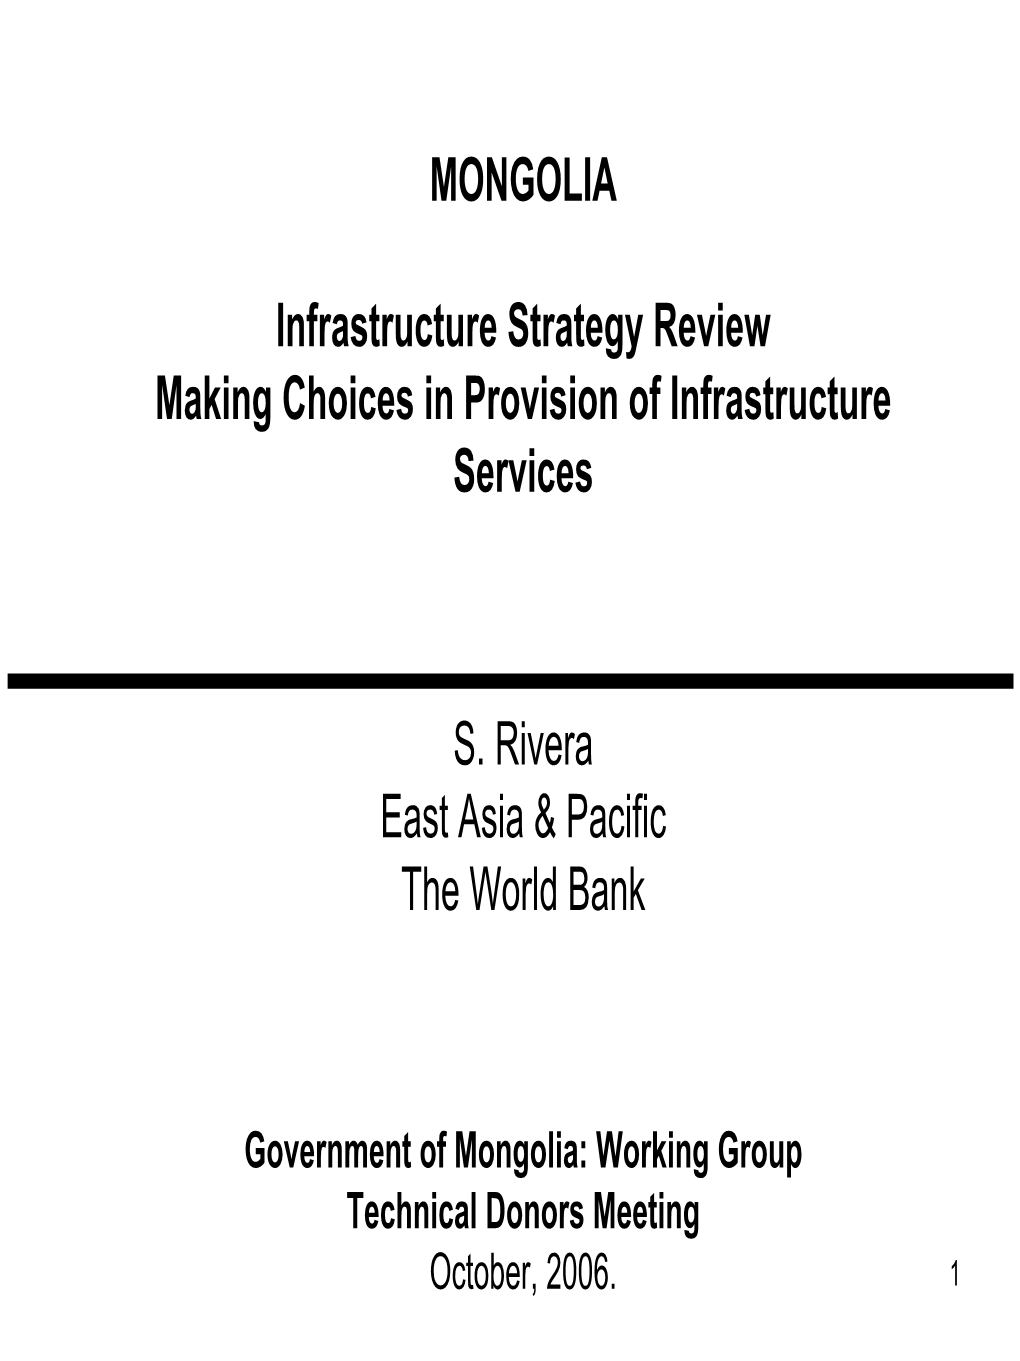 Infrastructure Strategy Review Making Choices in Provision of Infrastructure Services